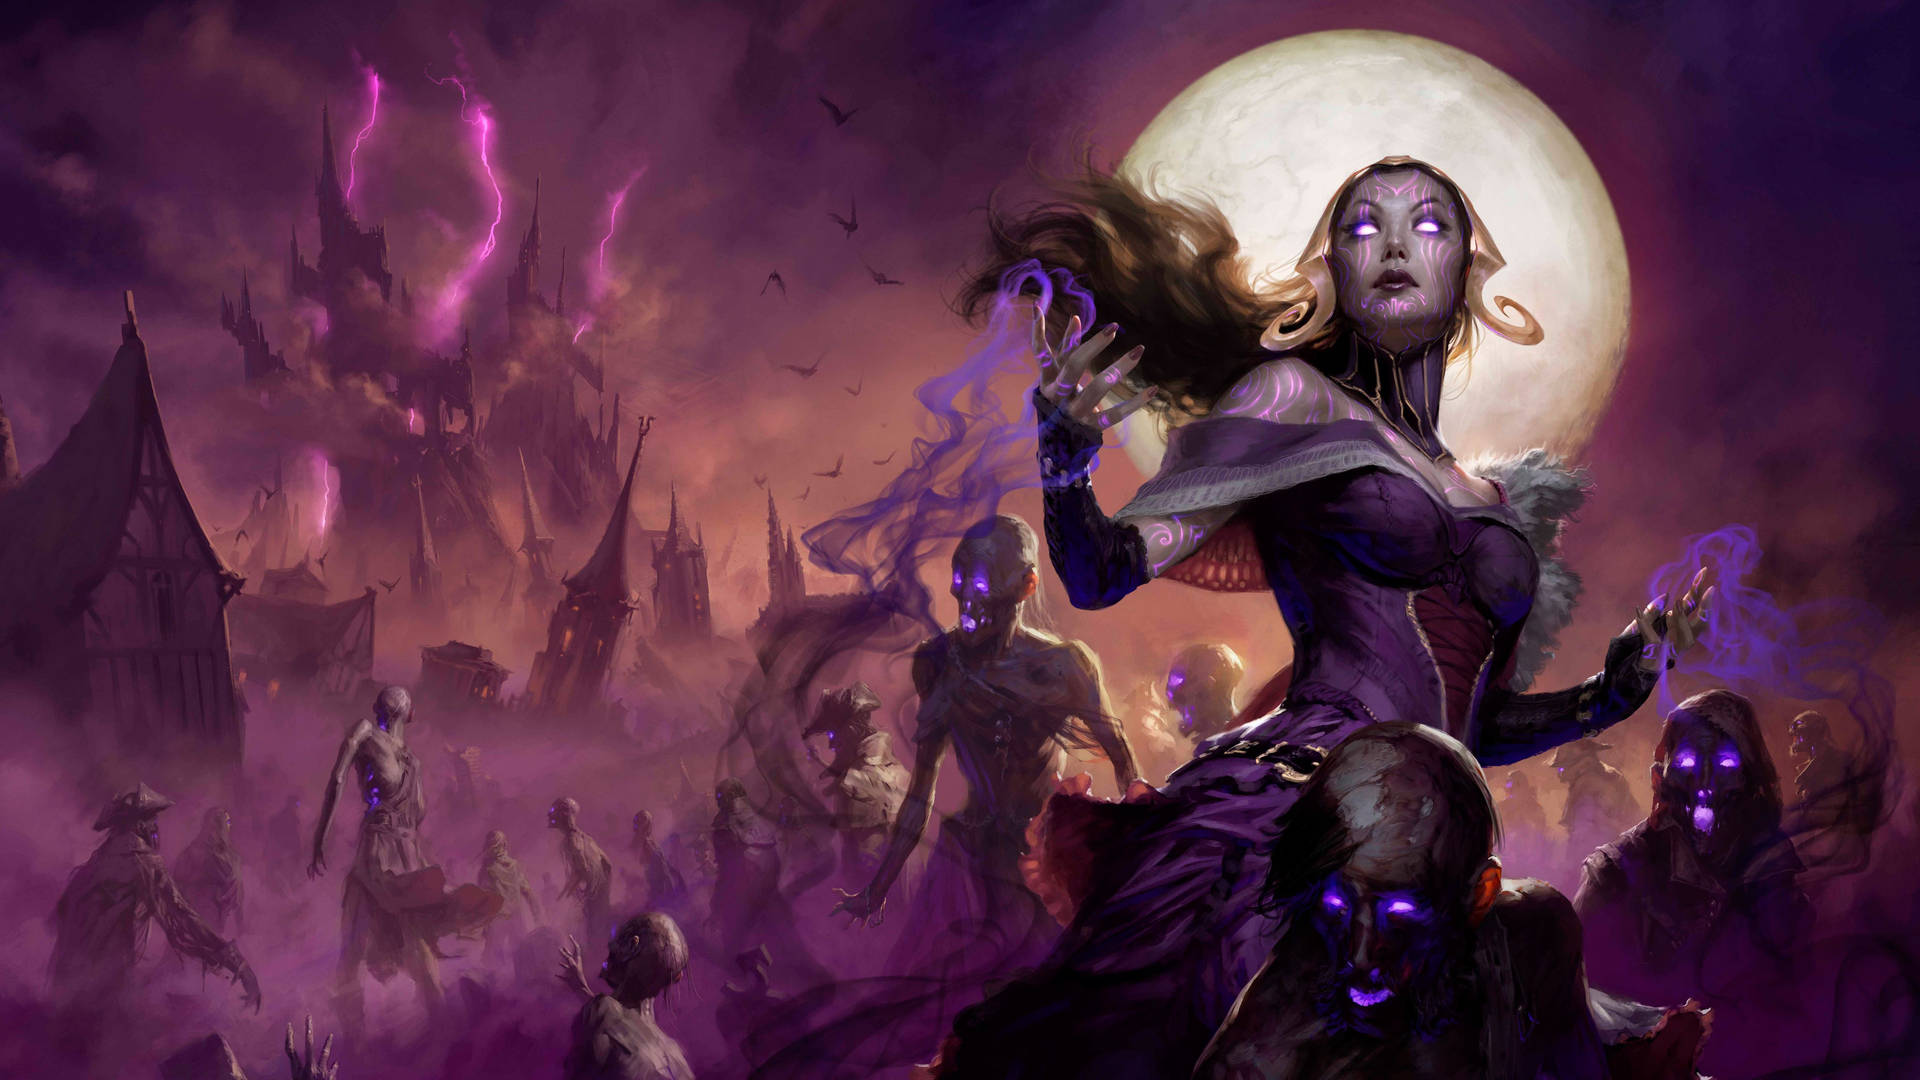 Explore The Mysterious World of Magic The Gathering with Eldritch Moon Wallpaper